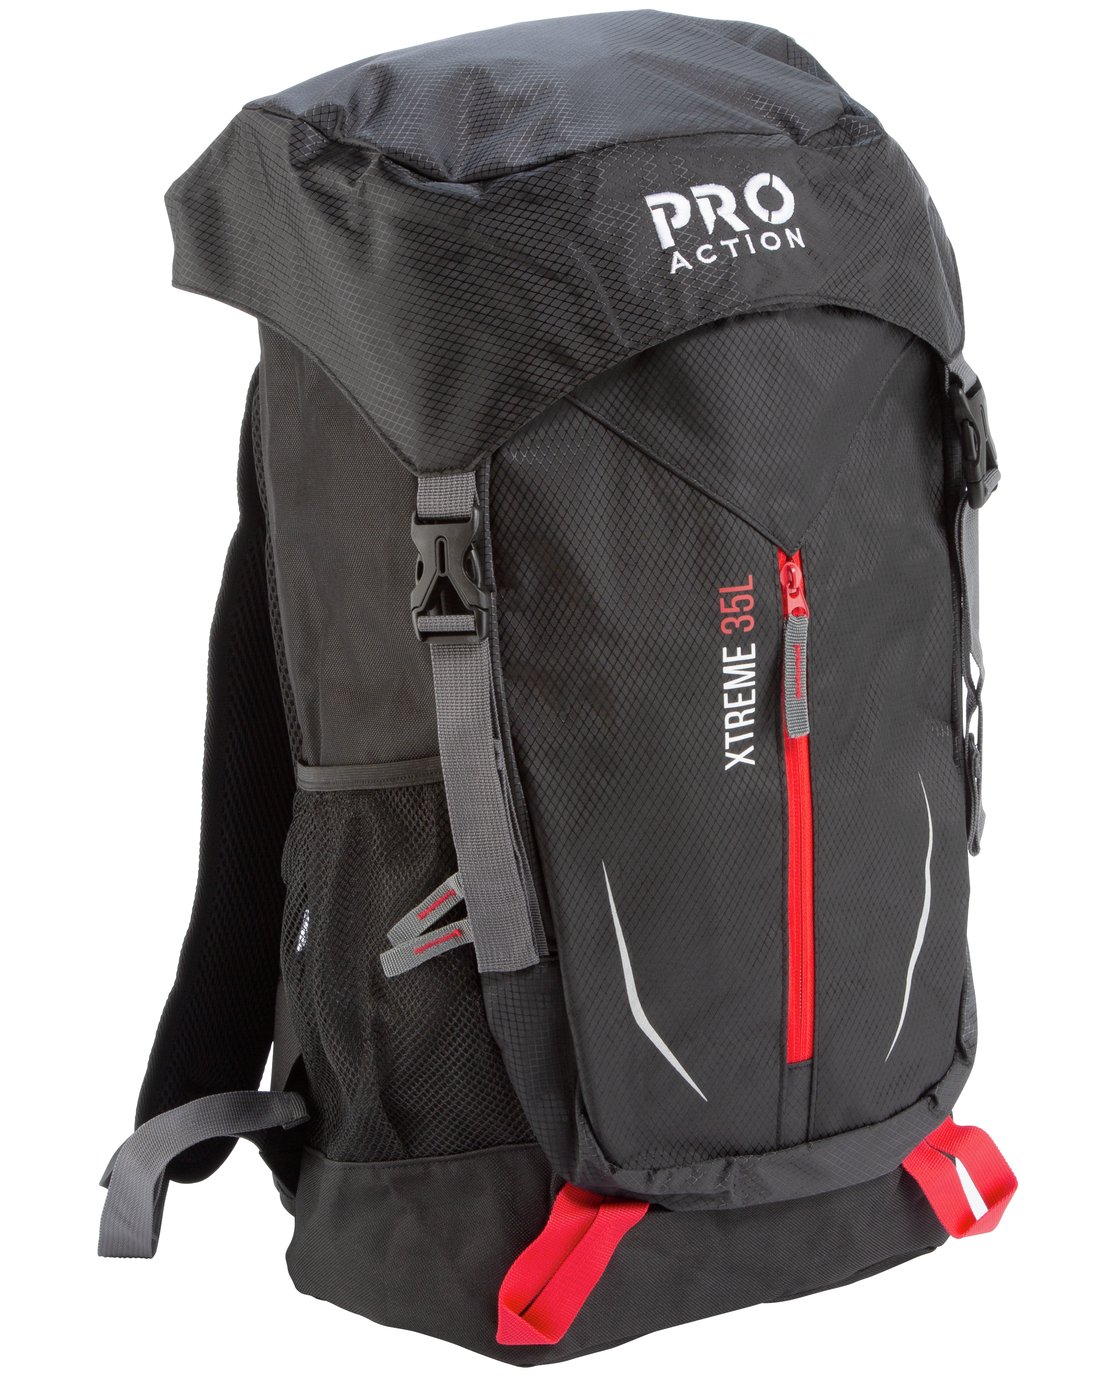 ProAction Xtreme 35L Backpack Review